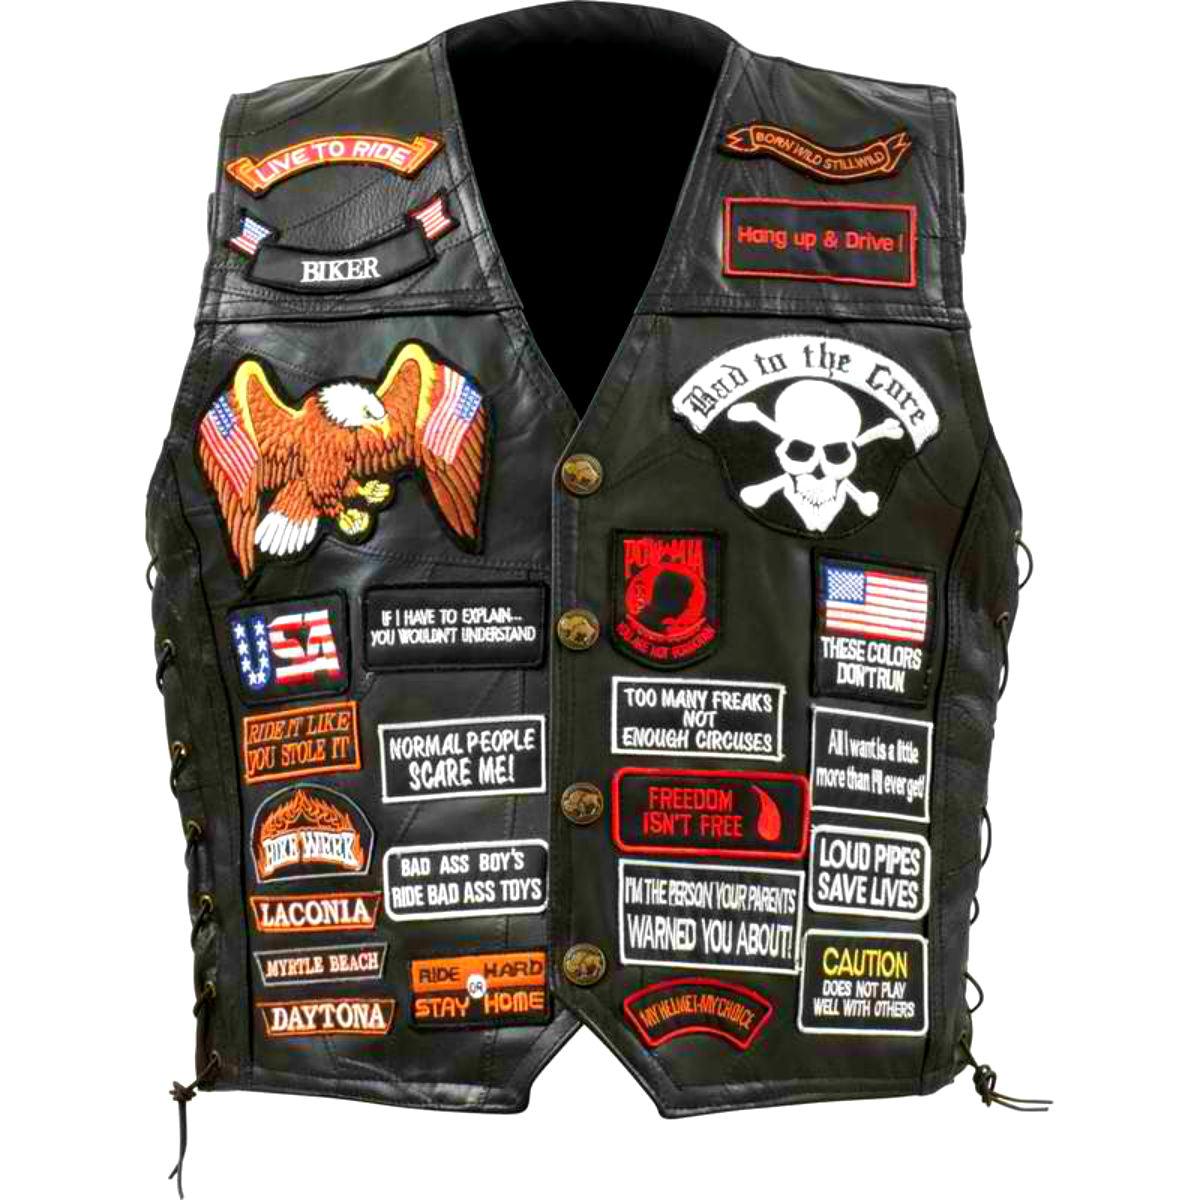 Diamond Plate™ Buffalo Leather Biker Vest with 42 Patches - American Legend Rider